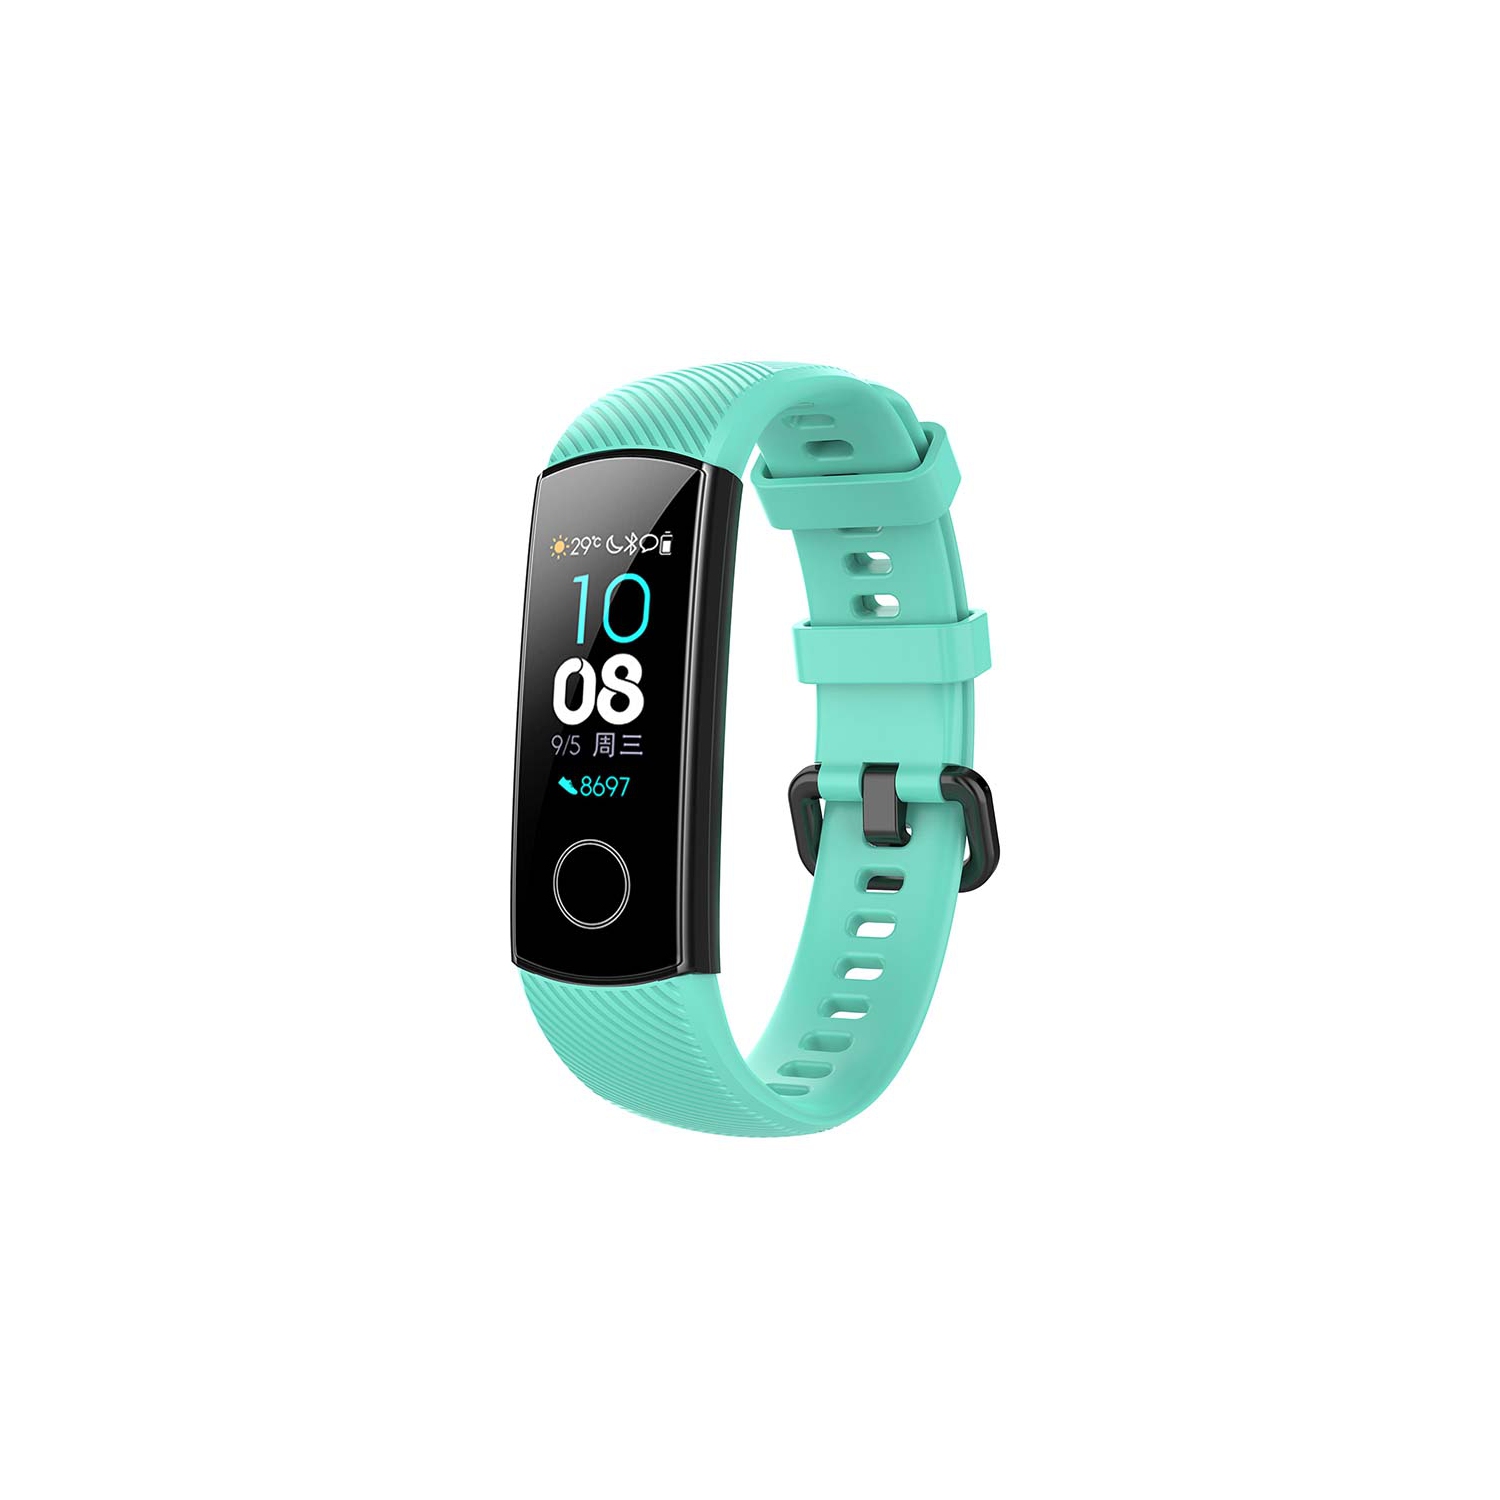 StrapsCo Silicone Rubber Watch Band Strap for Huawei Honor Band 4 - Mint